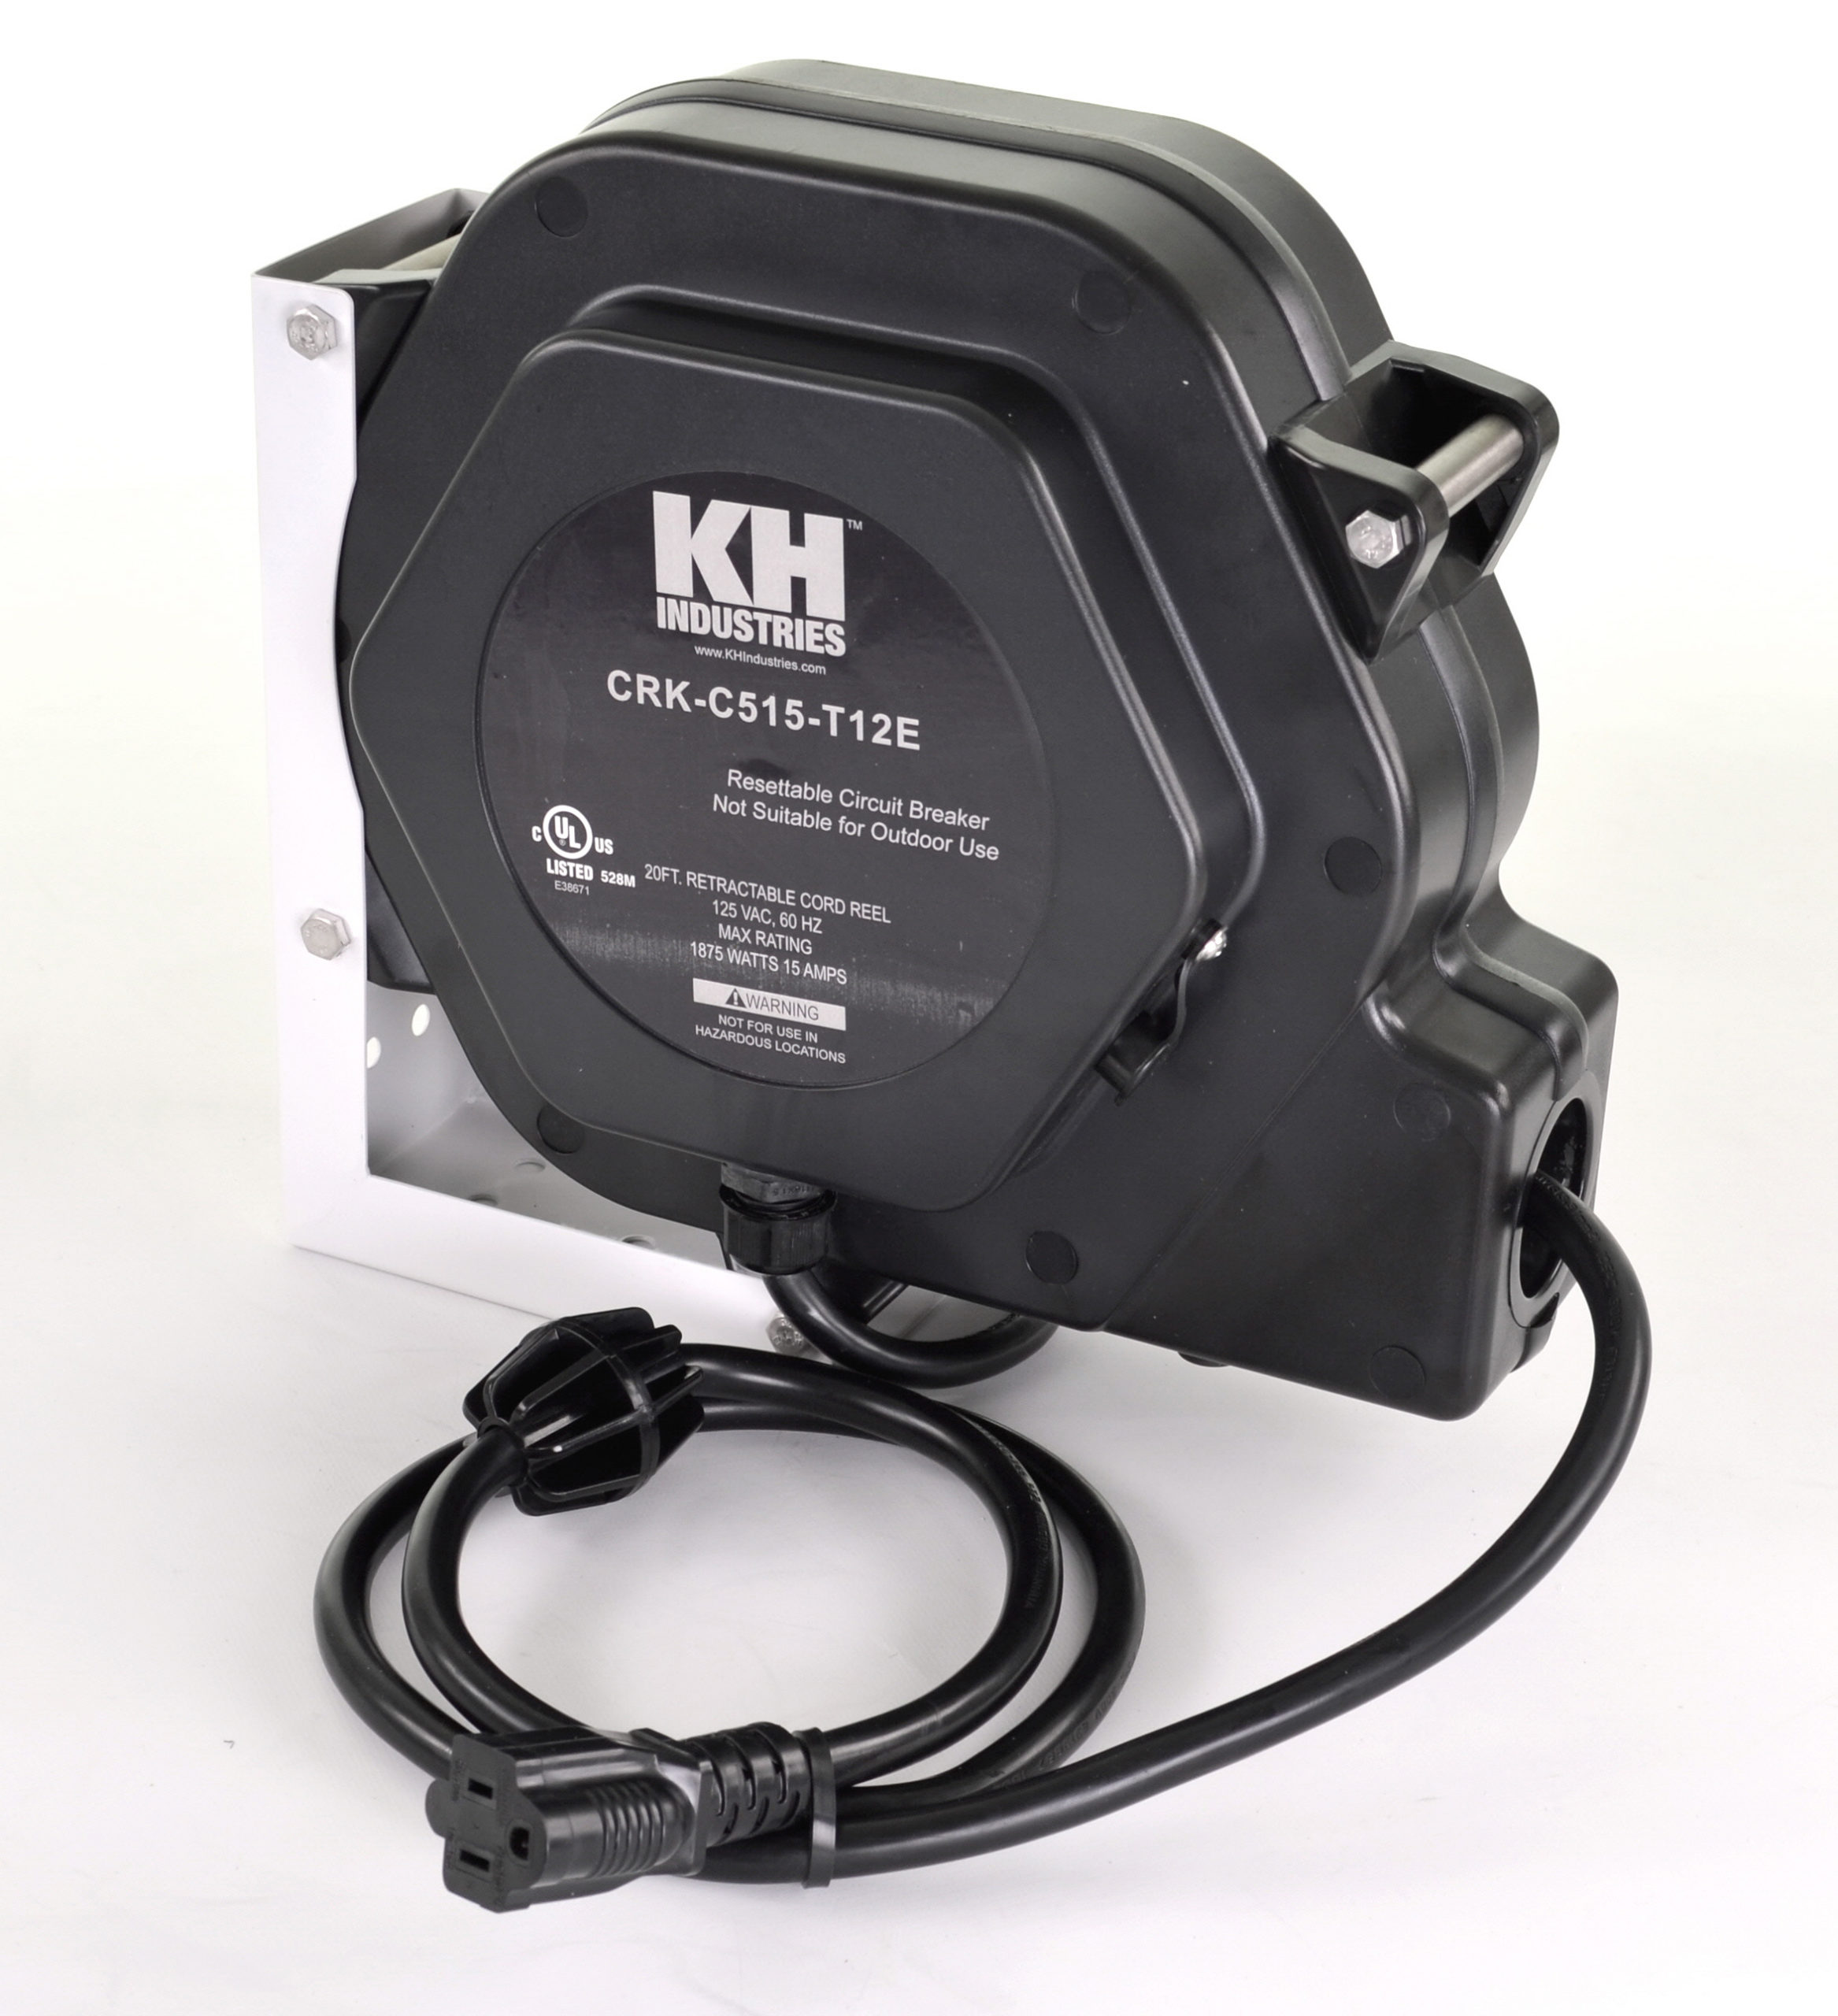 Kh Industries 25 ft. 12/3 Retractable Cord Reel 15 Amps RTAG3LW